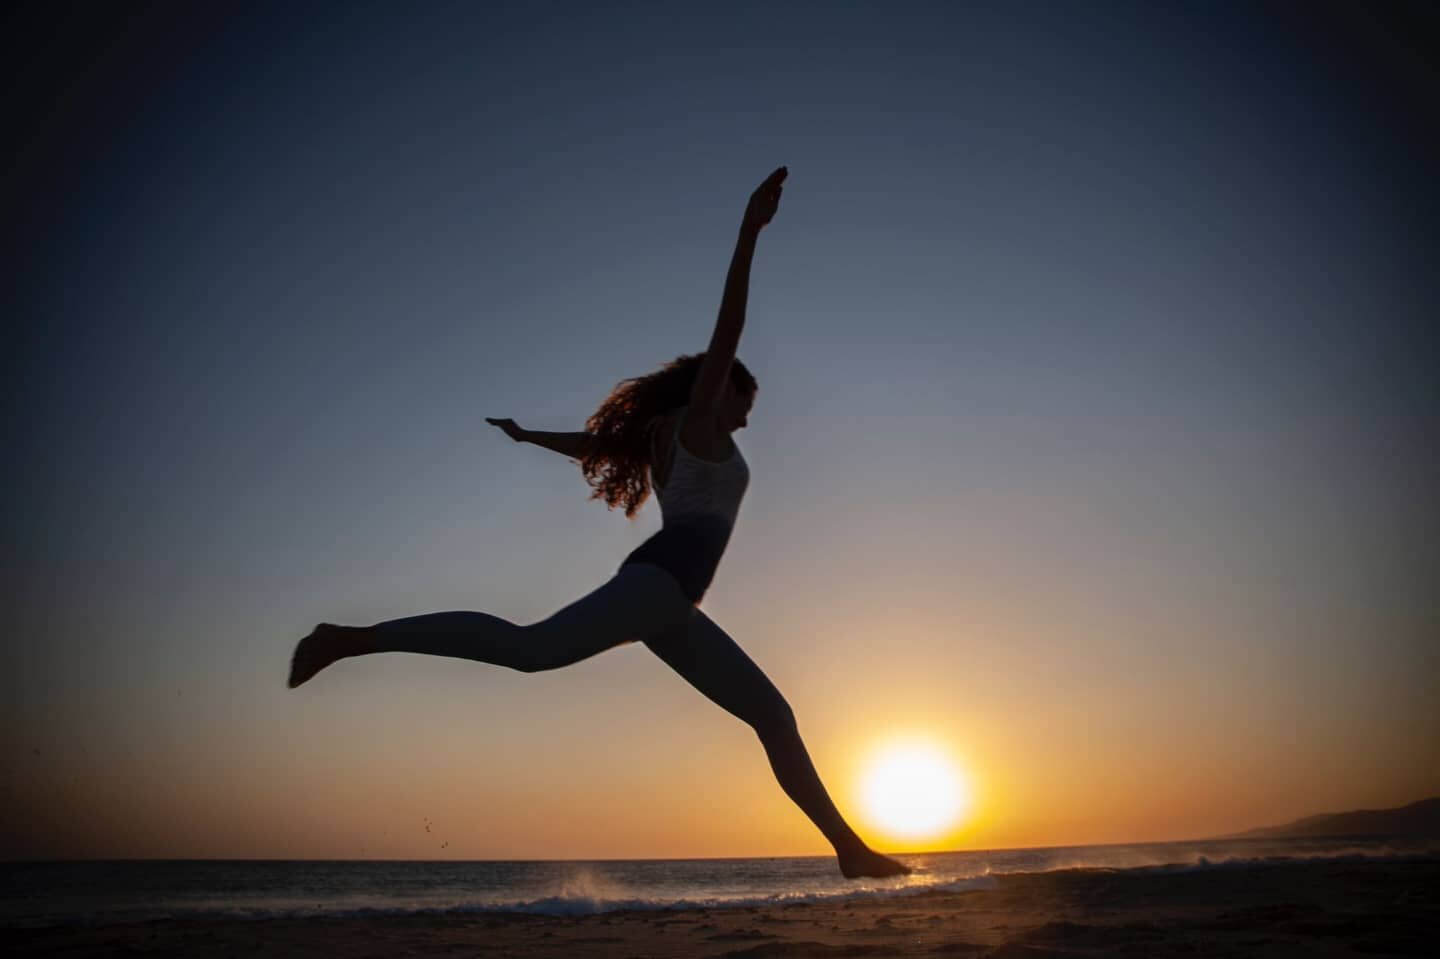 Let's dare to jump, and maybe we'll fly! Happy full moon 🌕😊

📸 @ikifrederike_photographer 

#yogagirl #loveandalliscoming #yogafit #sunsetyoga #inspiredyogis #jumpingfitness #wellnesscoach #healthylifestyle #trustyourjourney #freeyourself